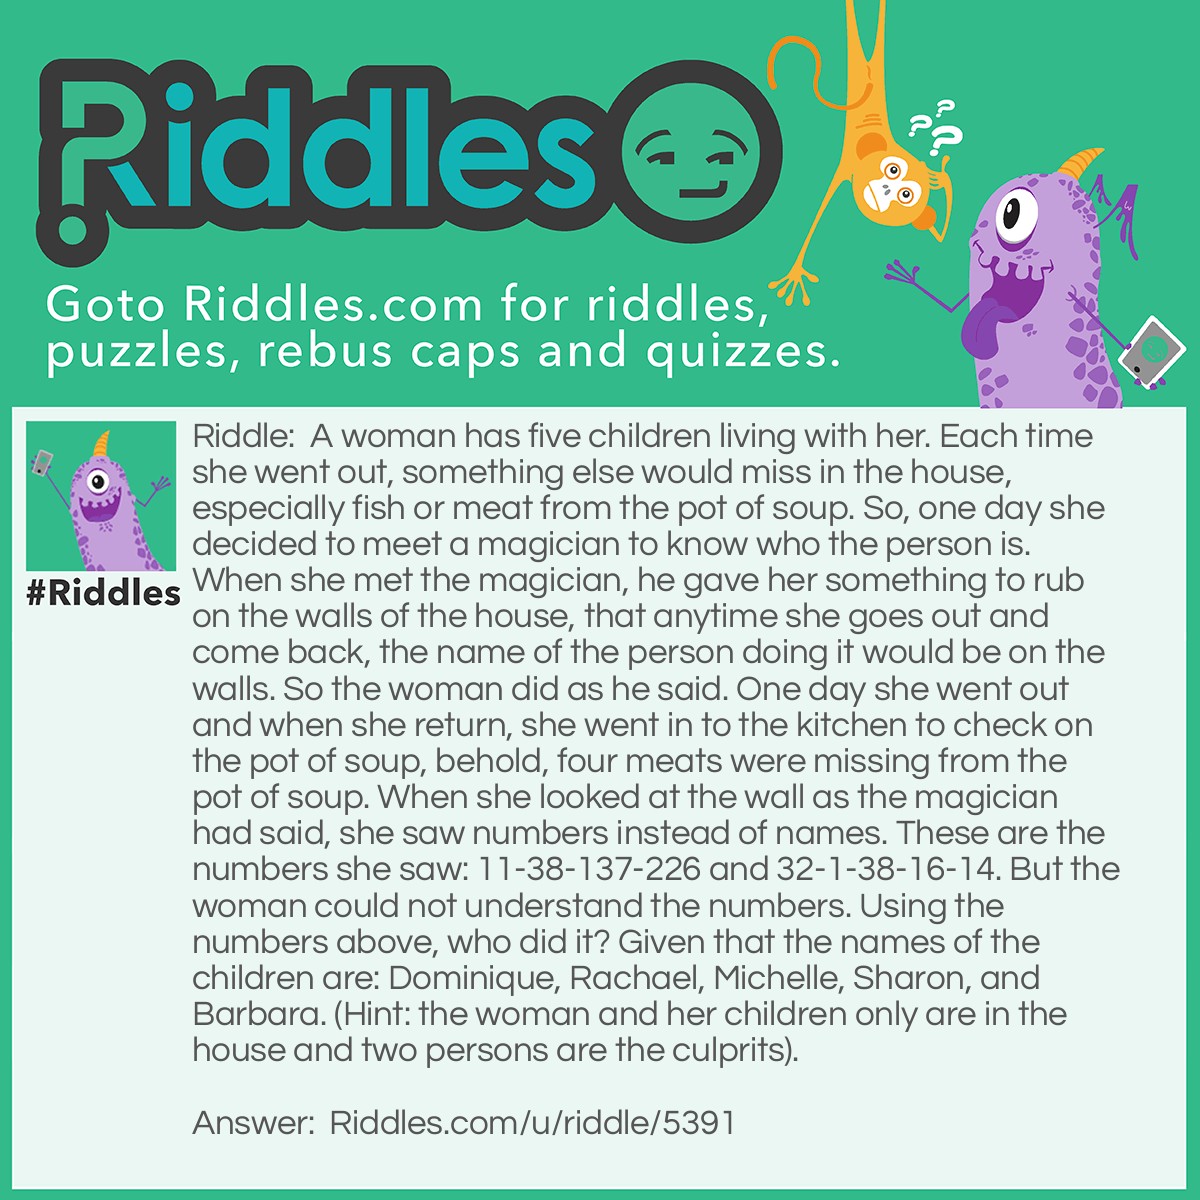 Riddle: A woman has five children living with her. Each time she went out, something else would miss in the house, especially fish or meat from the pot of soup. So, one day she decided to meet a magician to know who the person is. When she met the magician, he gave her something to rub on the walls of the house, that anytime she goes out and come back, the name of the person doing it would be on the walls. So the woman did as he said. One day she went out and when she return, she went in to the kitchen to check on the pot of soup, behold, four meats were missing from the pot of soup. When she looked at the wall as the magician had said, she saw numbers instead of names. These are the numbers she saw: 11-38-137-226 and 32-1-38-16-14. But the woman could not understand the numbers. Using the numbers above, who did it? Given that the names of the children are: Dominique, Rachael, Michelle, Sharon, and Barbara. (Hint: the woman and her children only are in the house and two persons are the culprits). Answer: The numbers corresponds to the relative atomic masses of elements in the periodic table. Therefore, Barbara and Sharon did it.